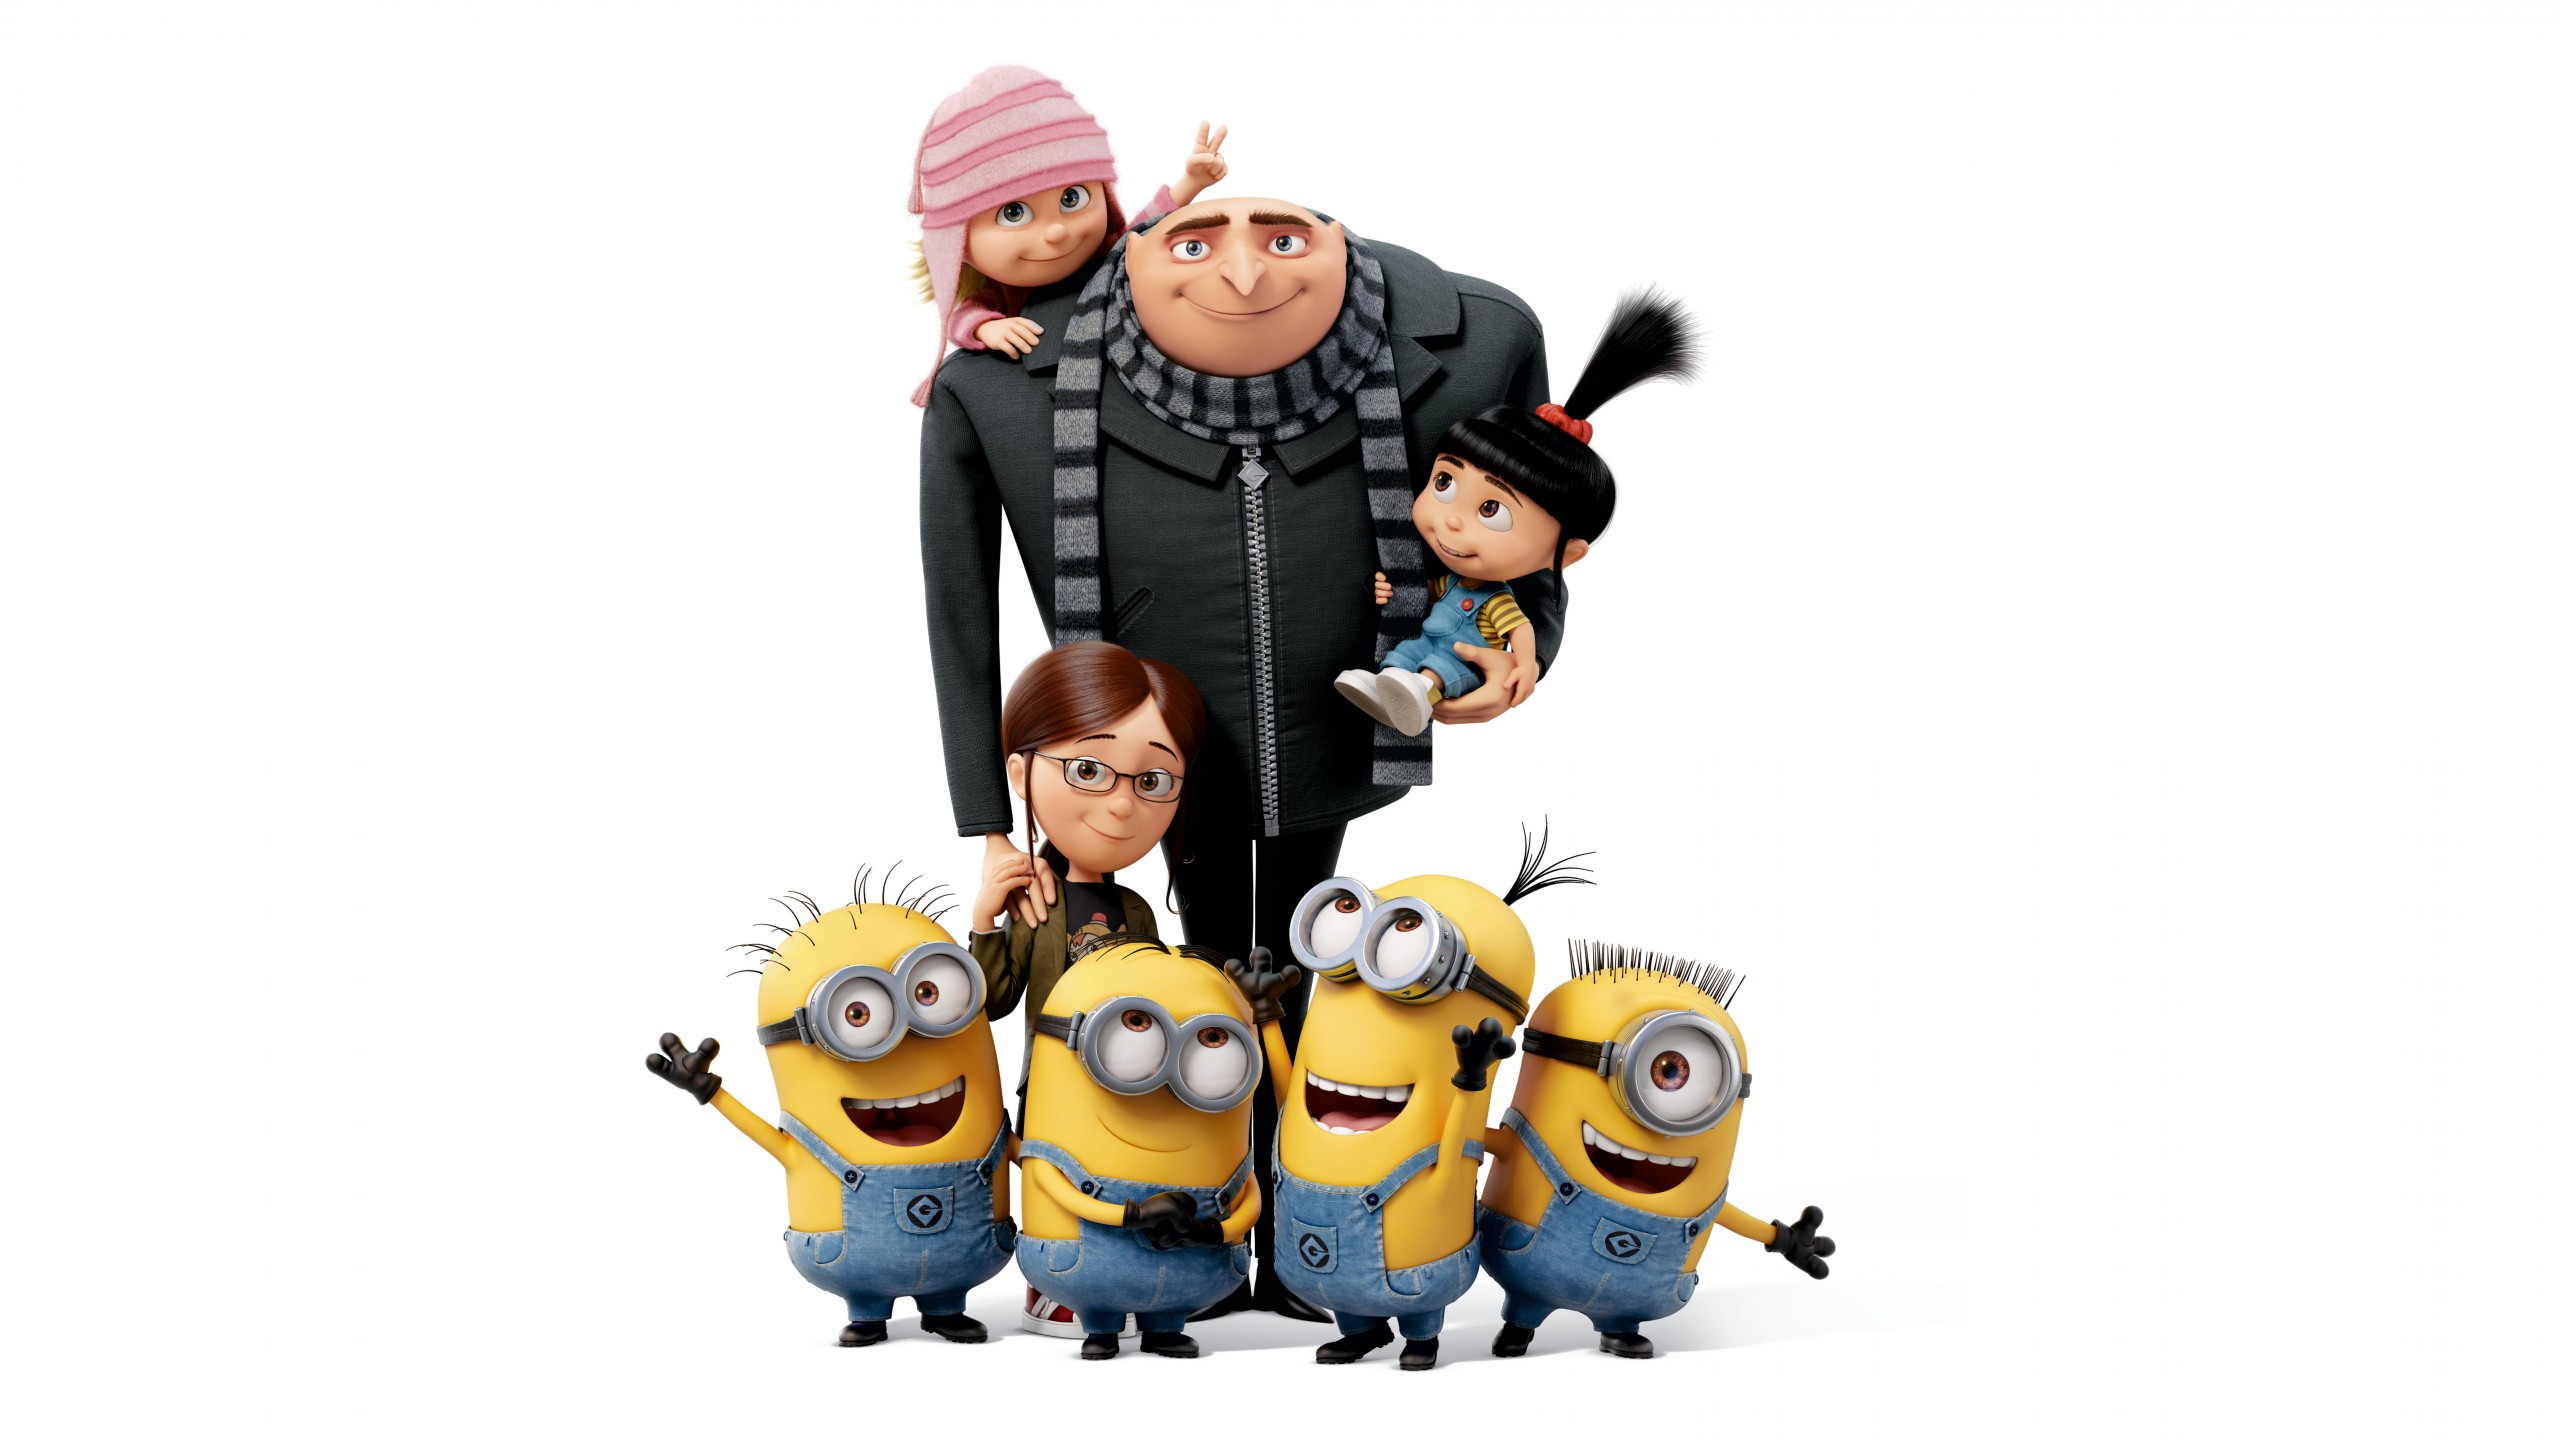 despicable me wallpaper,animated cartoon,cartoon,animation,toy,fictional character